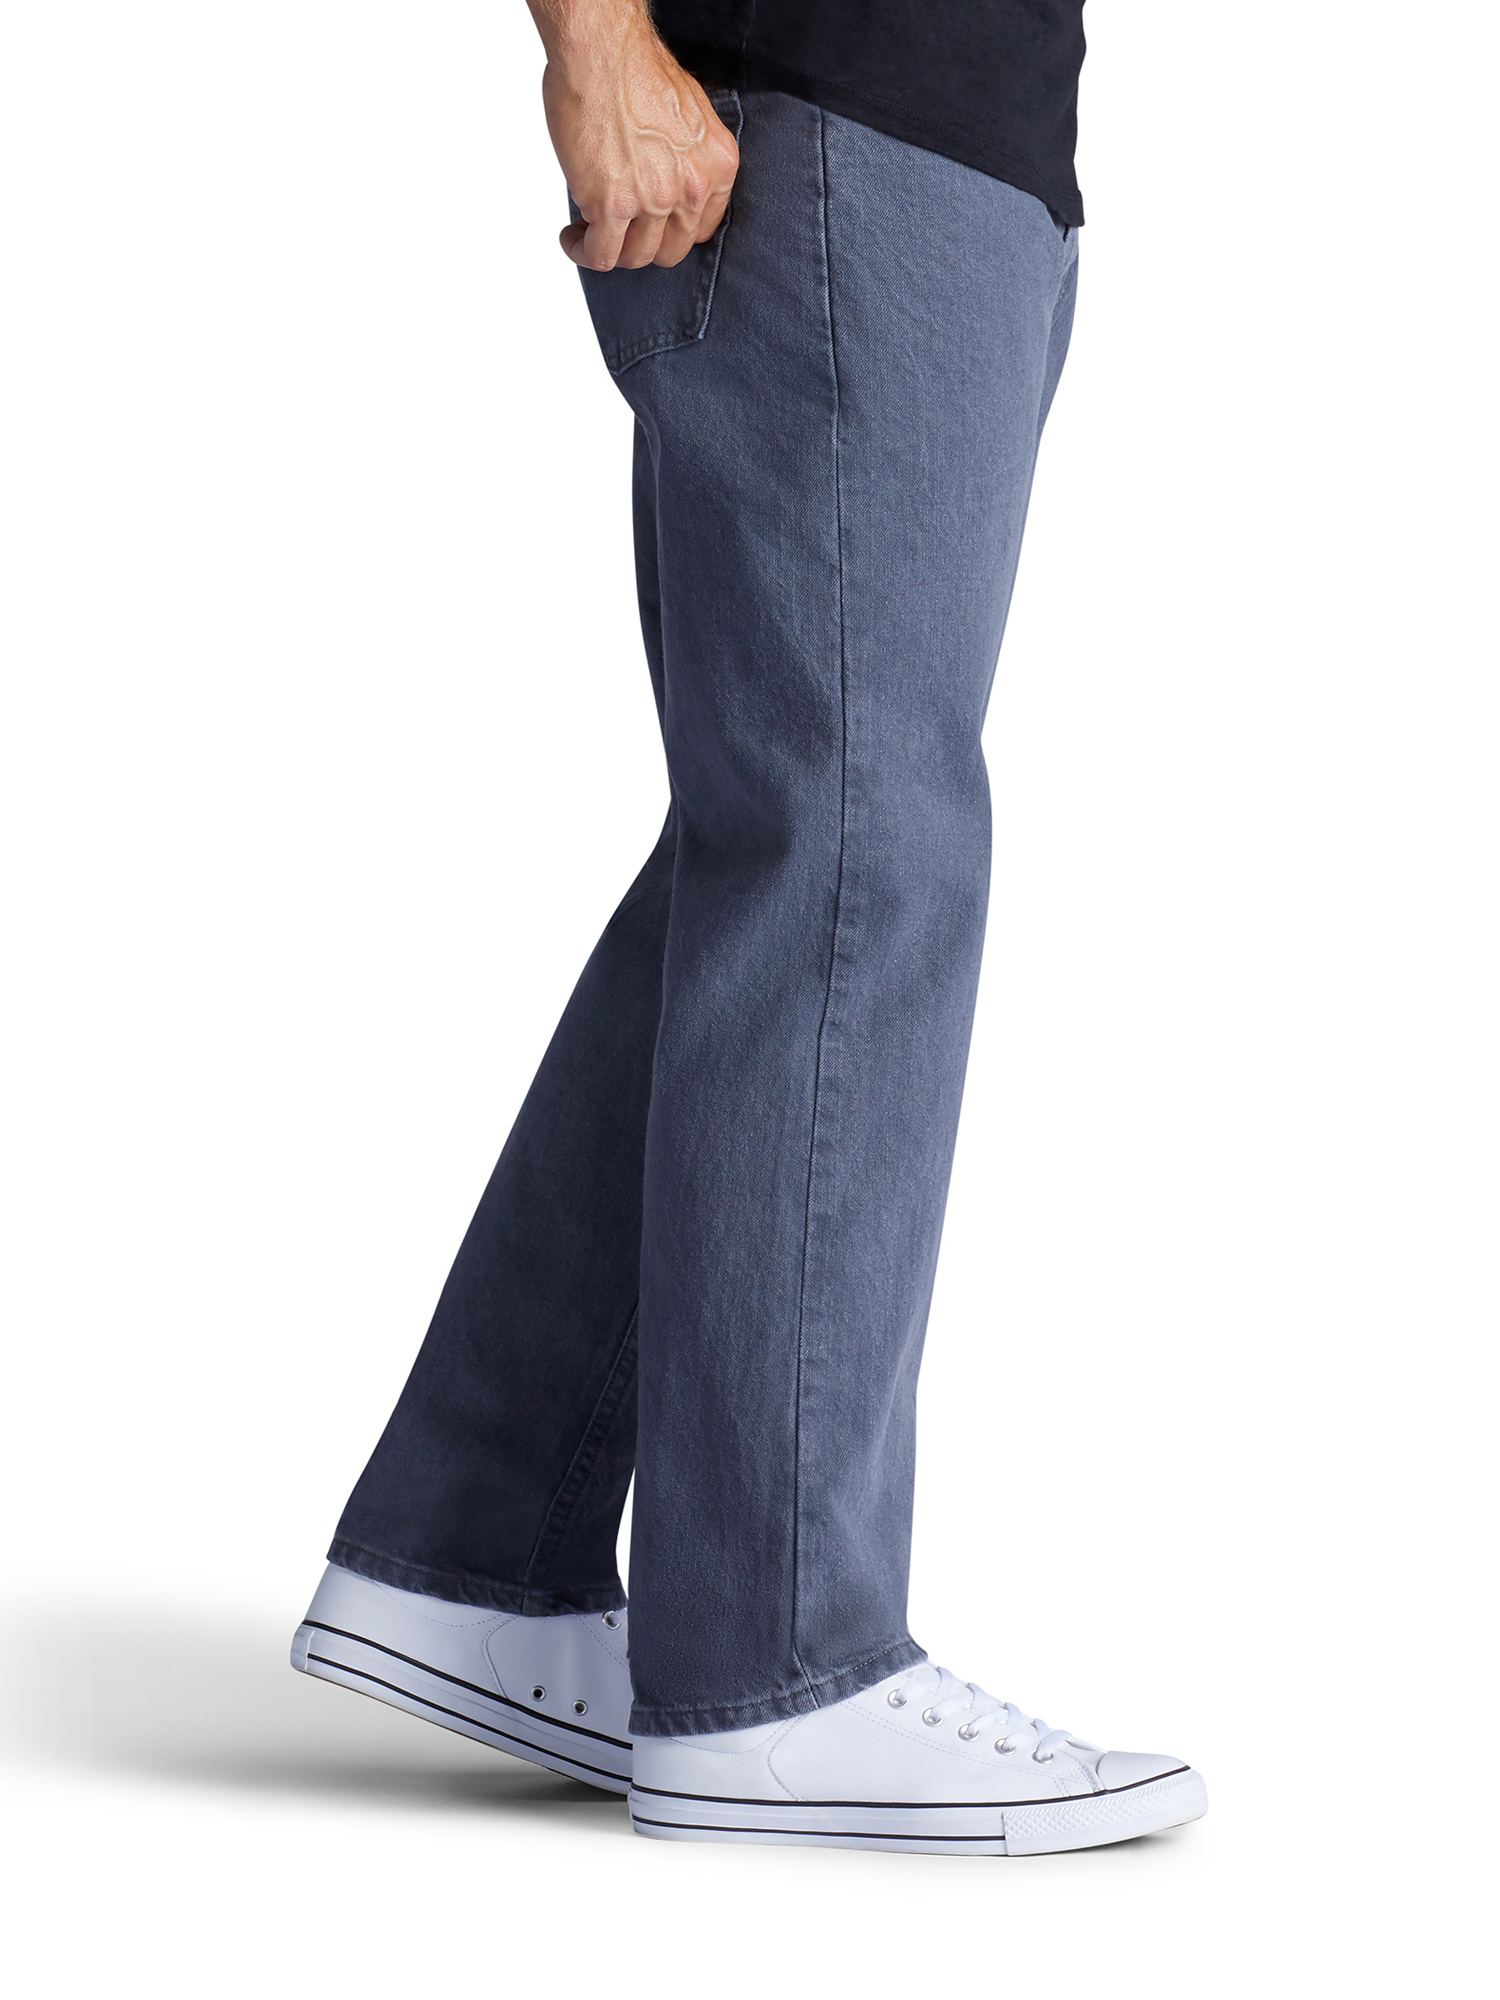 Lee Men's Relaxed Fit Straight Leg Jeans - image 3 of 3